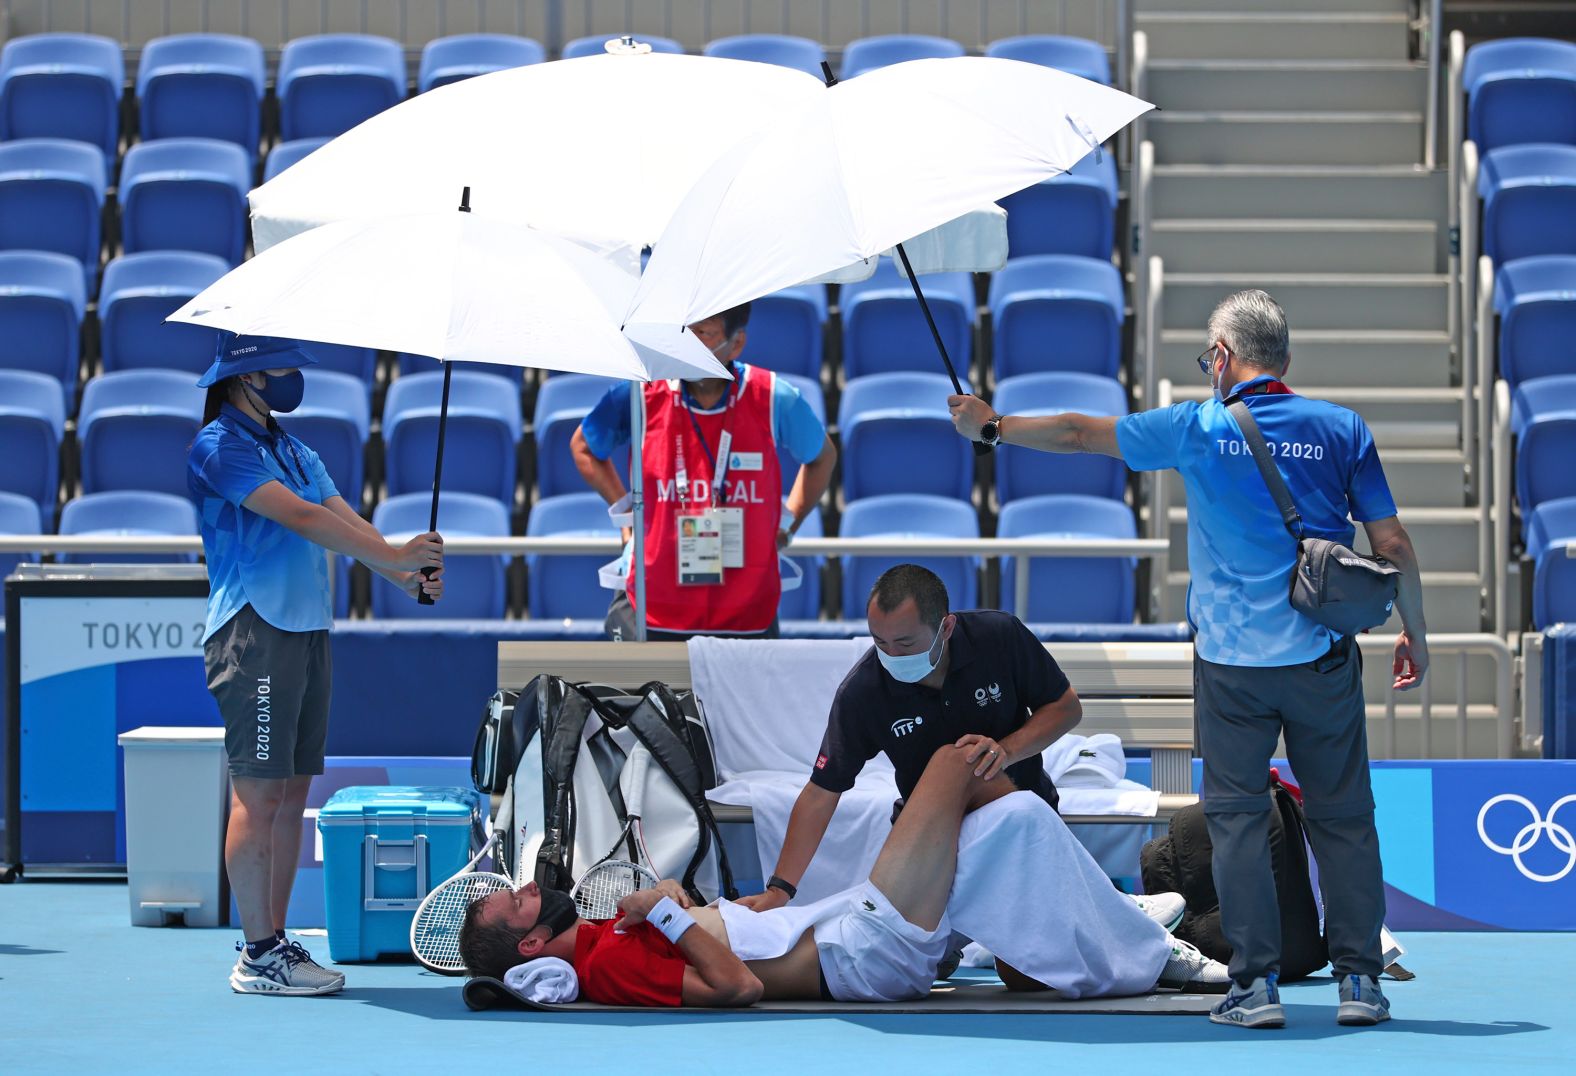 Russian tennis player Daniil Medvedev receives medical treatment during his third-round singles match on July 28. Midway through the match, the Russian — known for his dry humor and sarcasm — approached the chair umpire <a href="index.php?page=&url=https%3A%2F%2Fwww.cnn.com%2Fworld%2Flive-news%2Ftokyo-2020-olympics-07-28-21-spt%2Fh_b0563c9d42927603e030f93c22bb2492" target="_blank">to ask what would happen if he died.</a> Medvedev went on to win the match over Italy's Fabio Fognini.